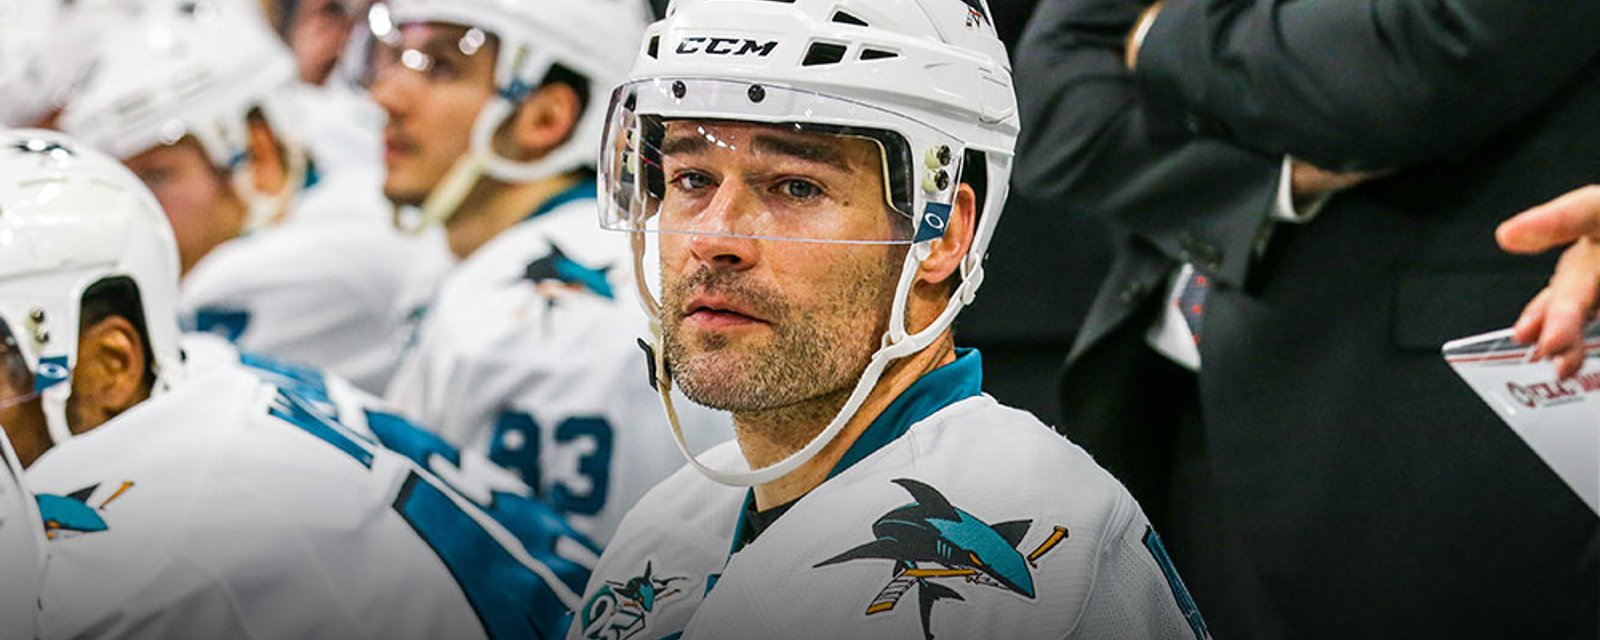 Report: Marleau being hotly pursued by Western Conference rival